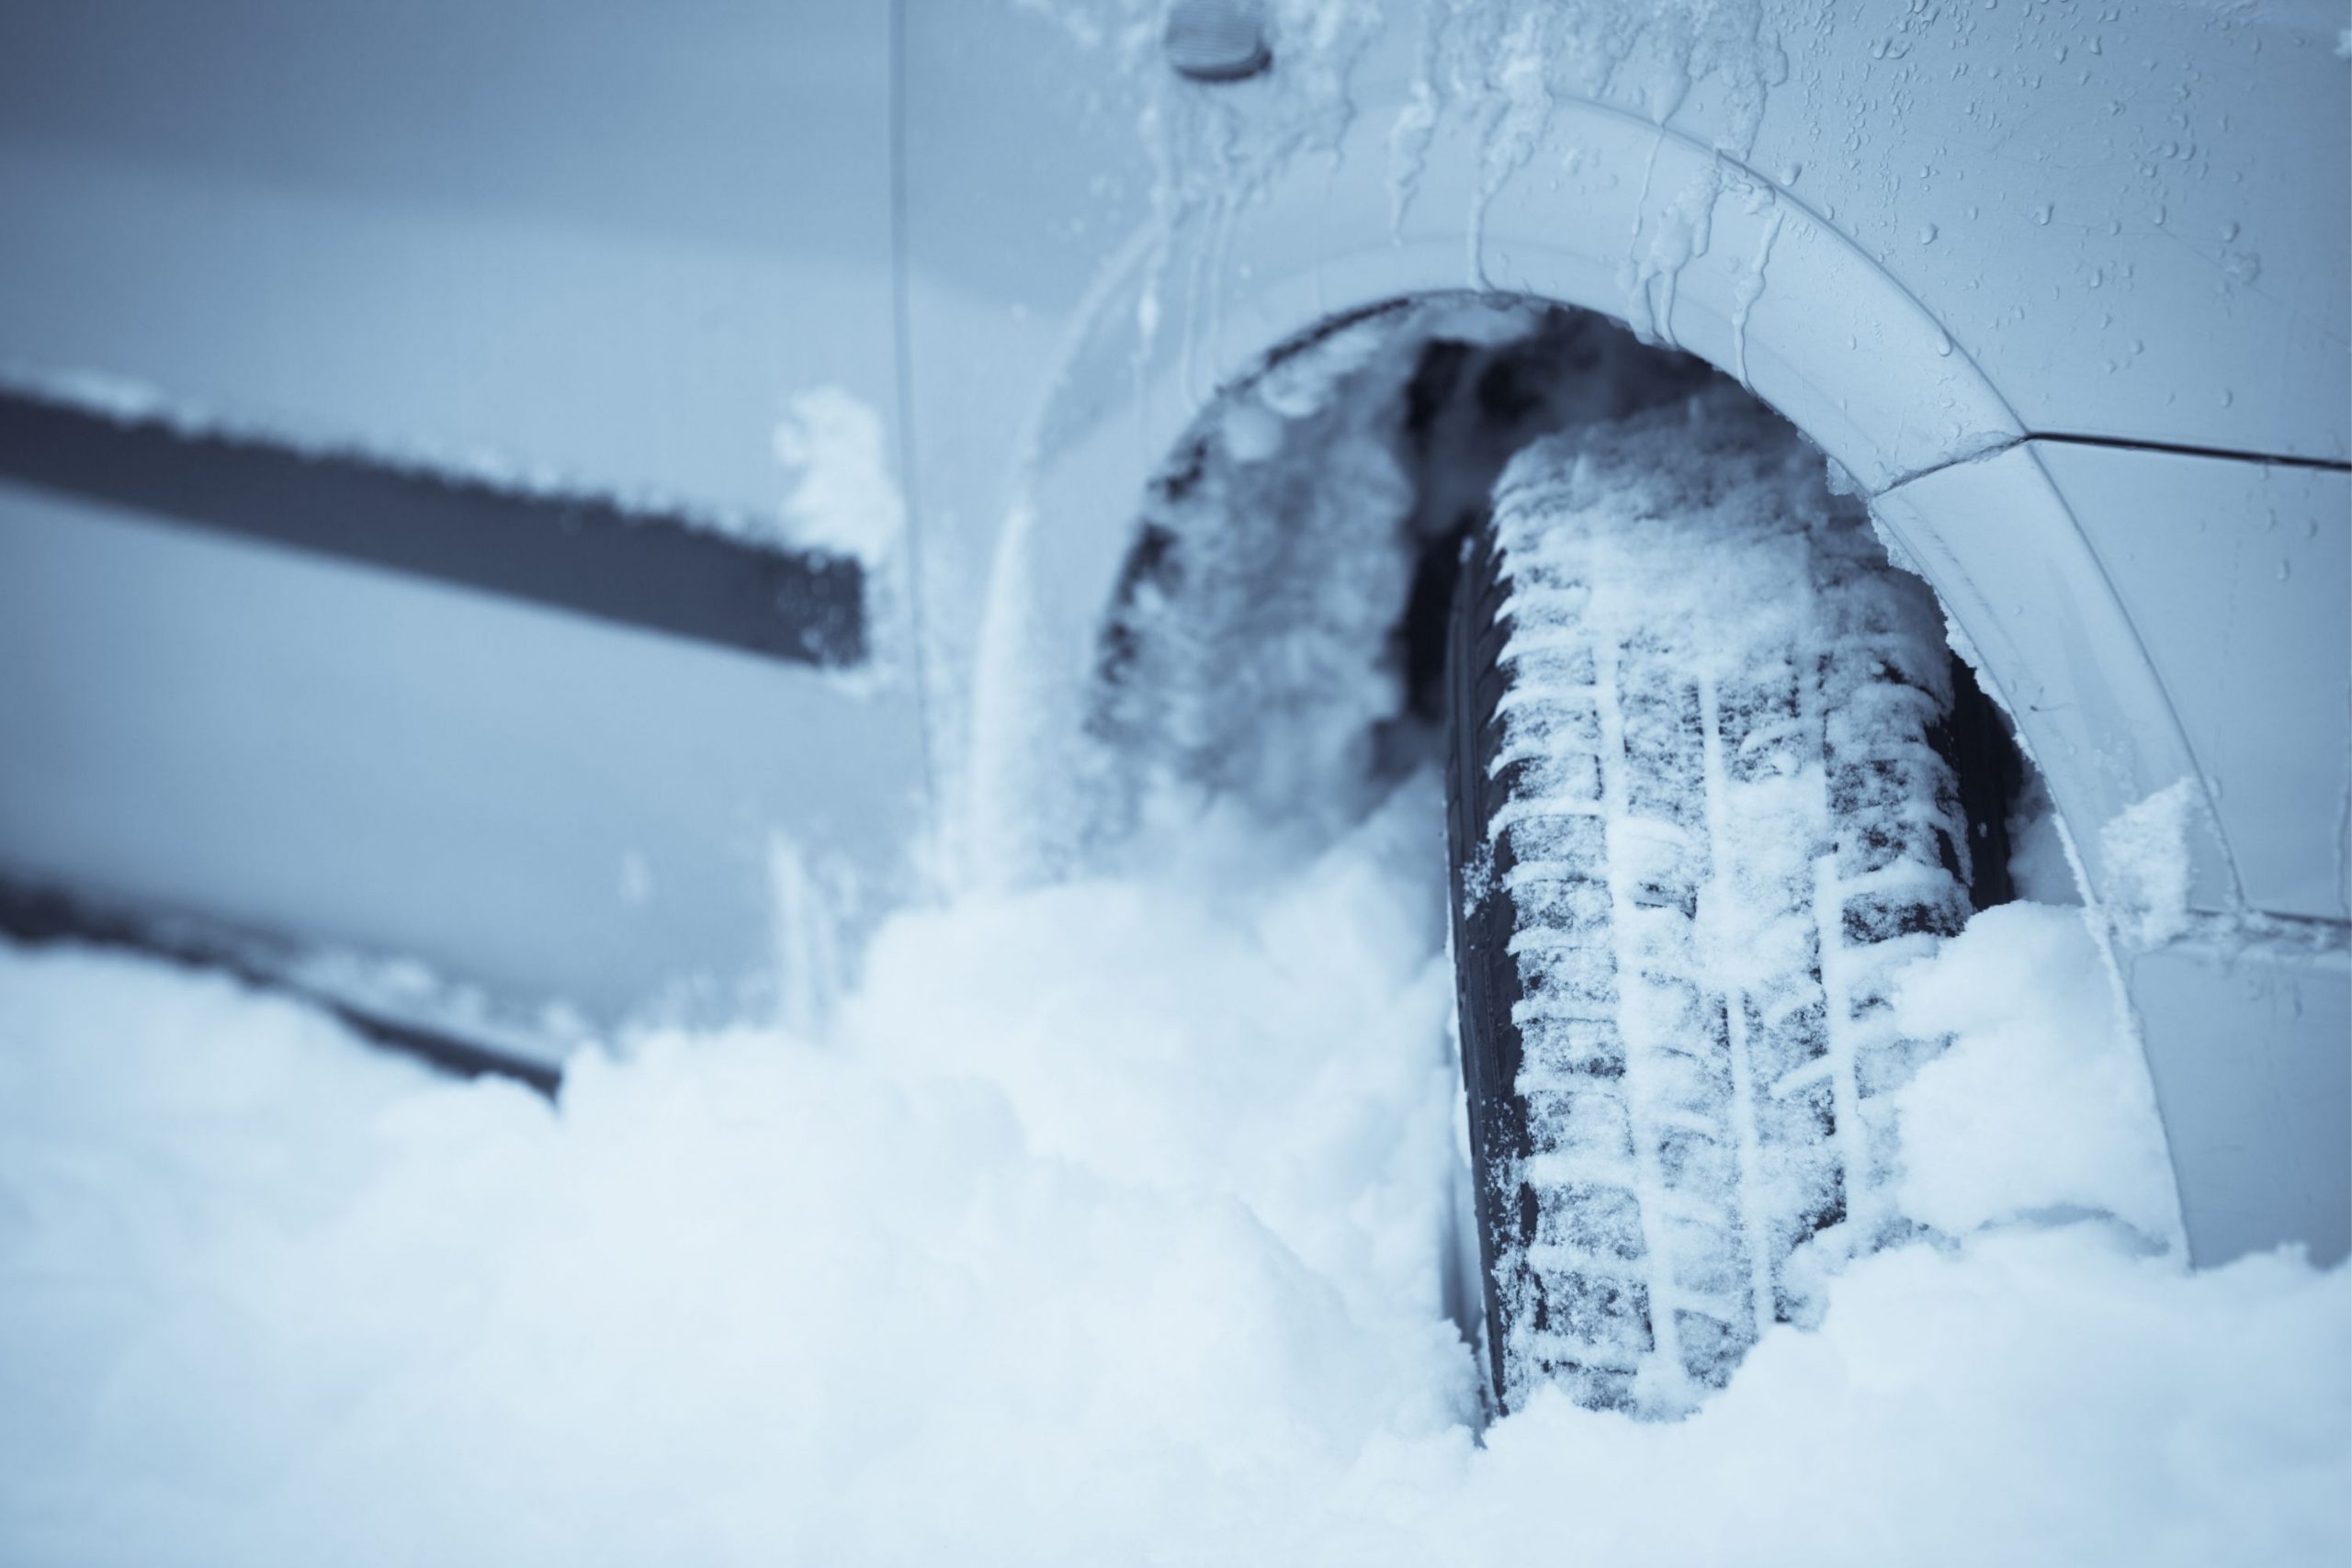 Other Things to Consider When Leaving Your Car Outside In Cold Weather